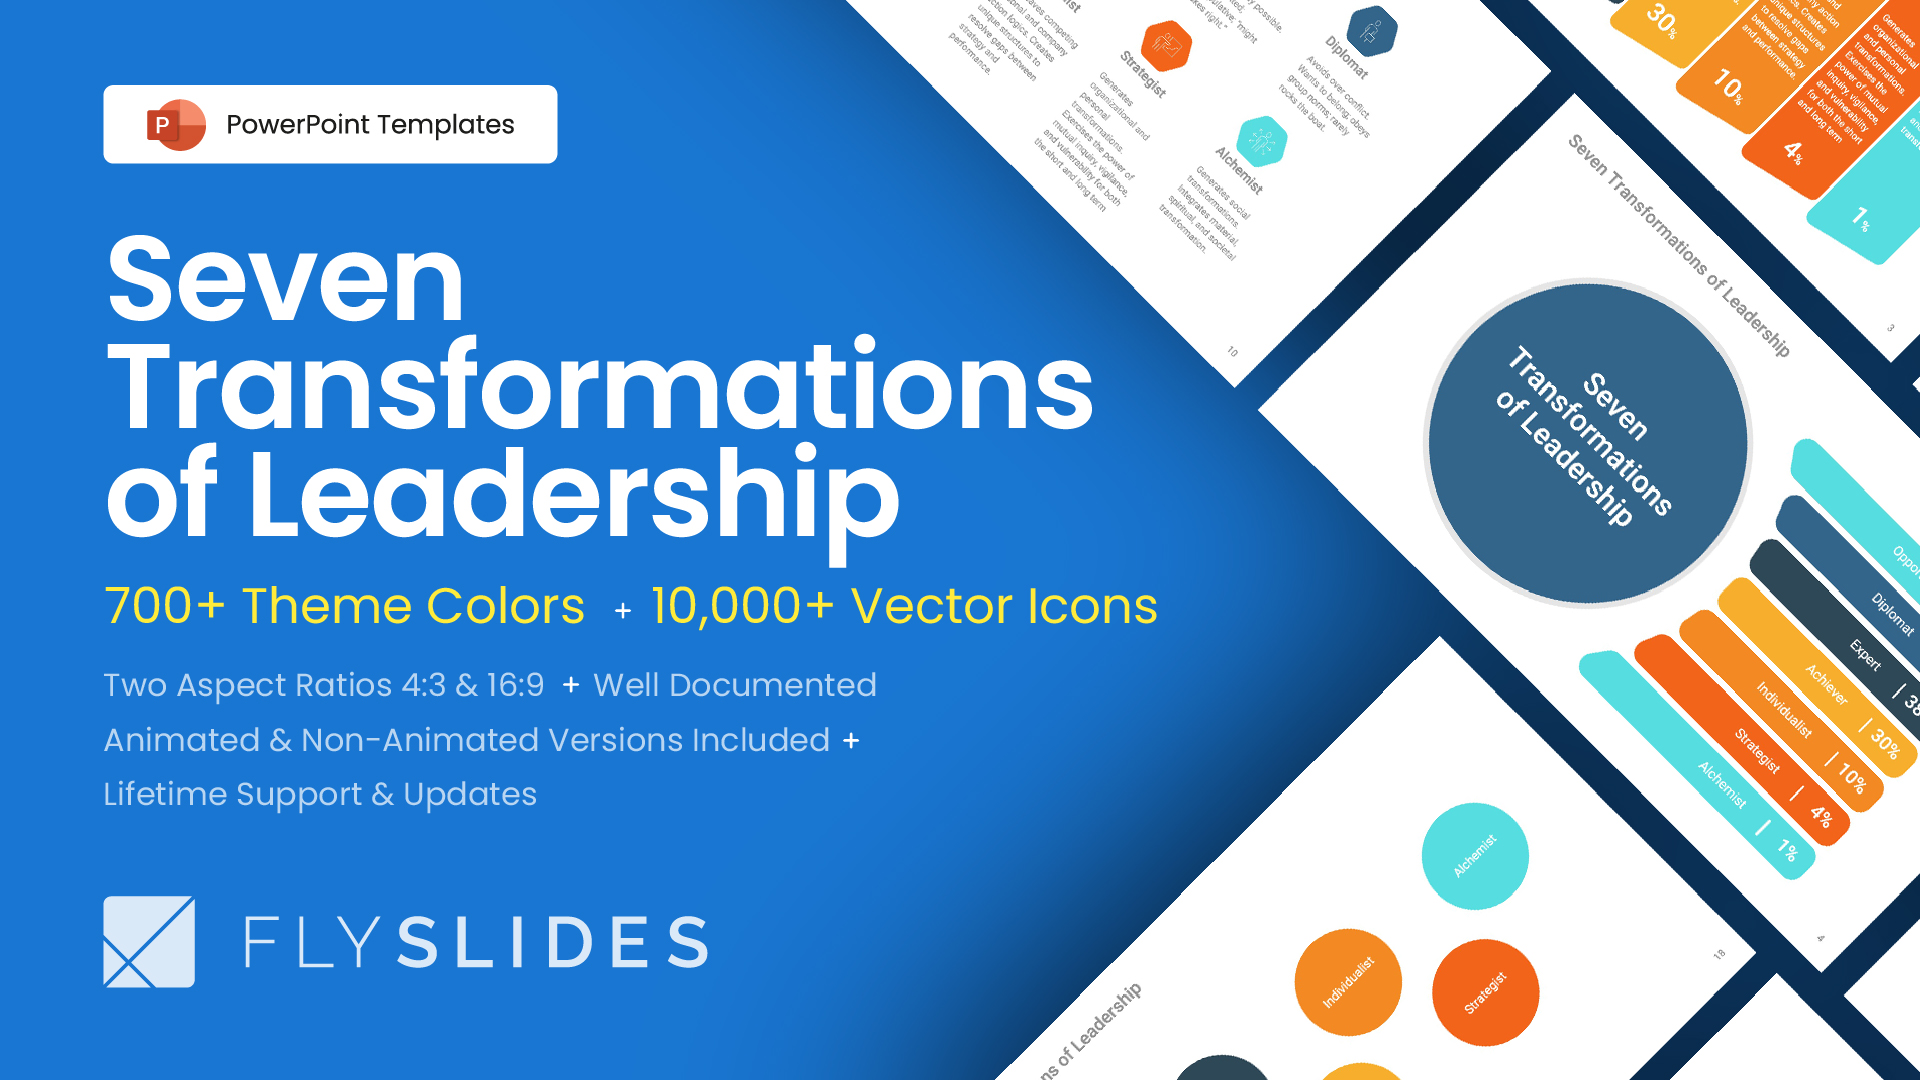 Seven Transformations of Leadership PowerPoint (PPT) Template FlySlides